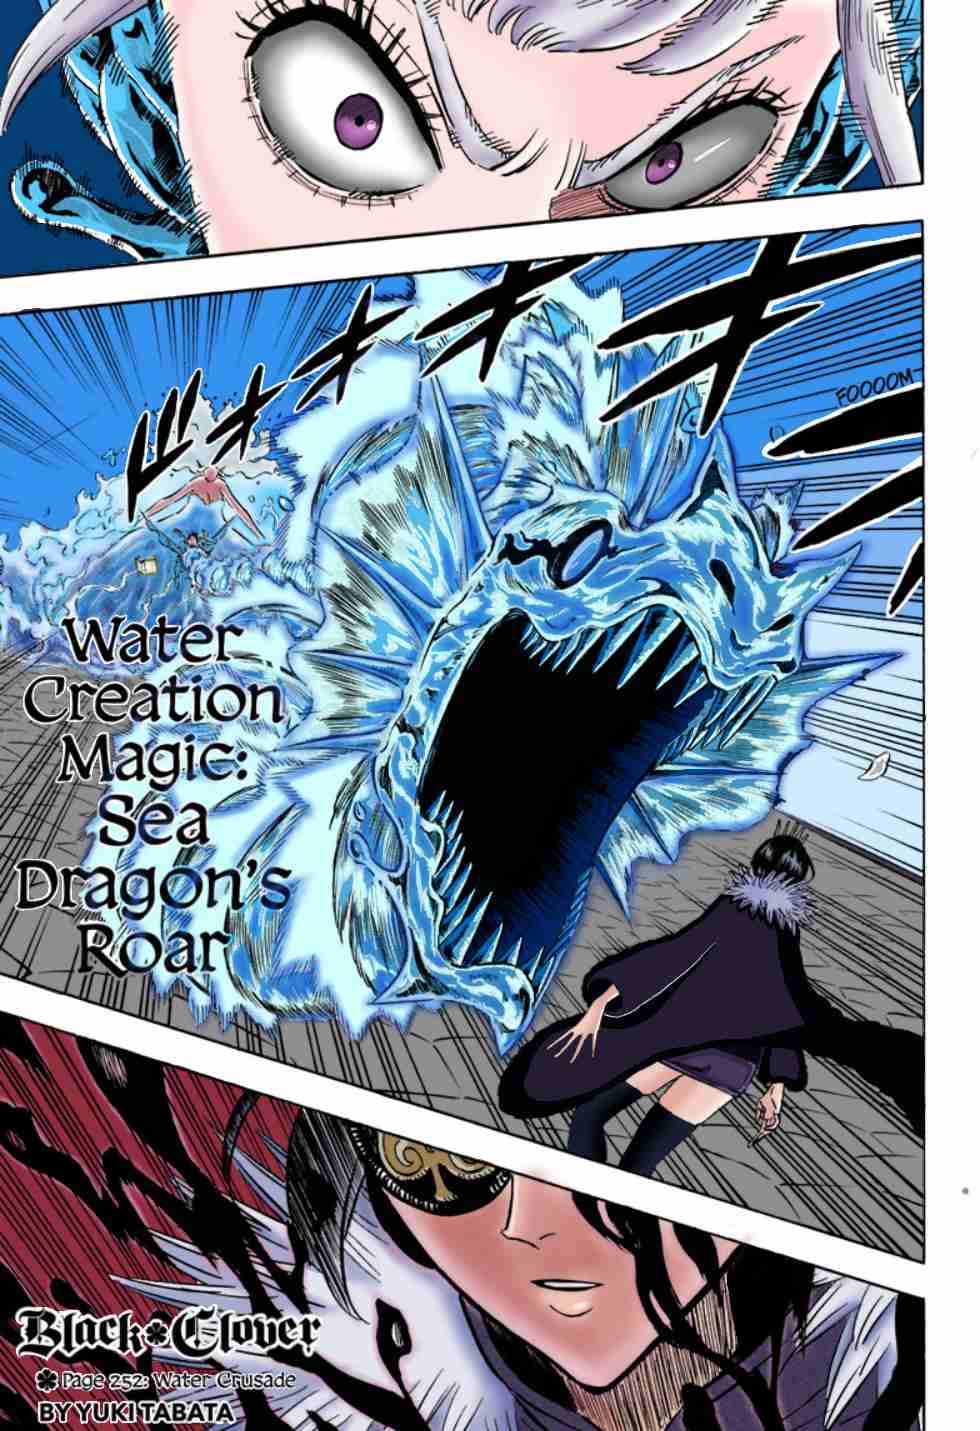 Black Clover (Fan Colored) Ch. 252 Water Crusade